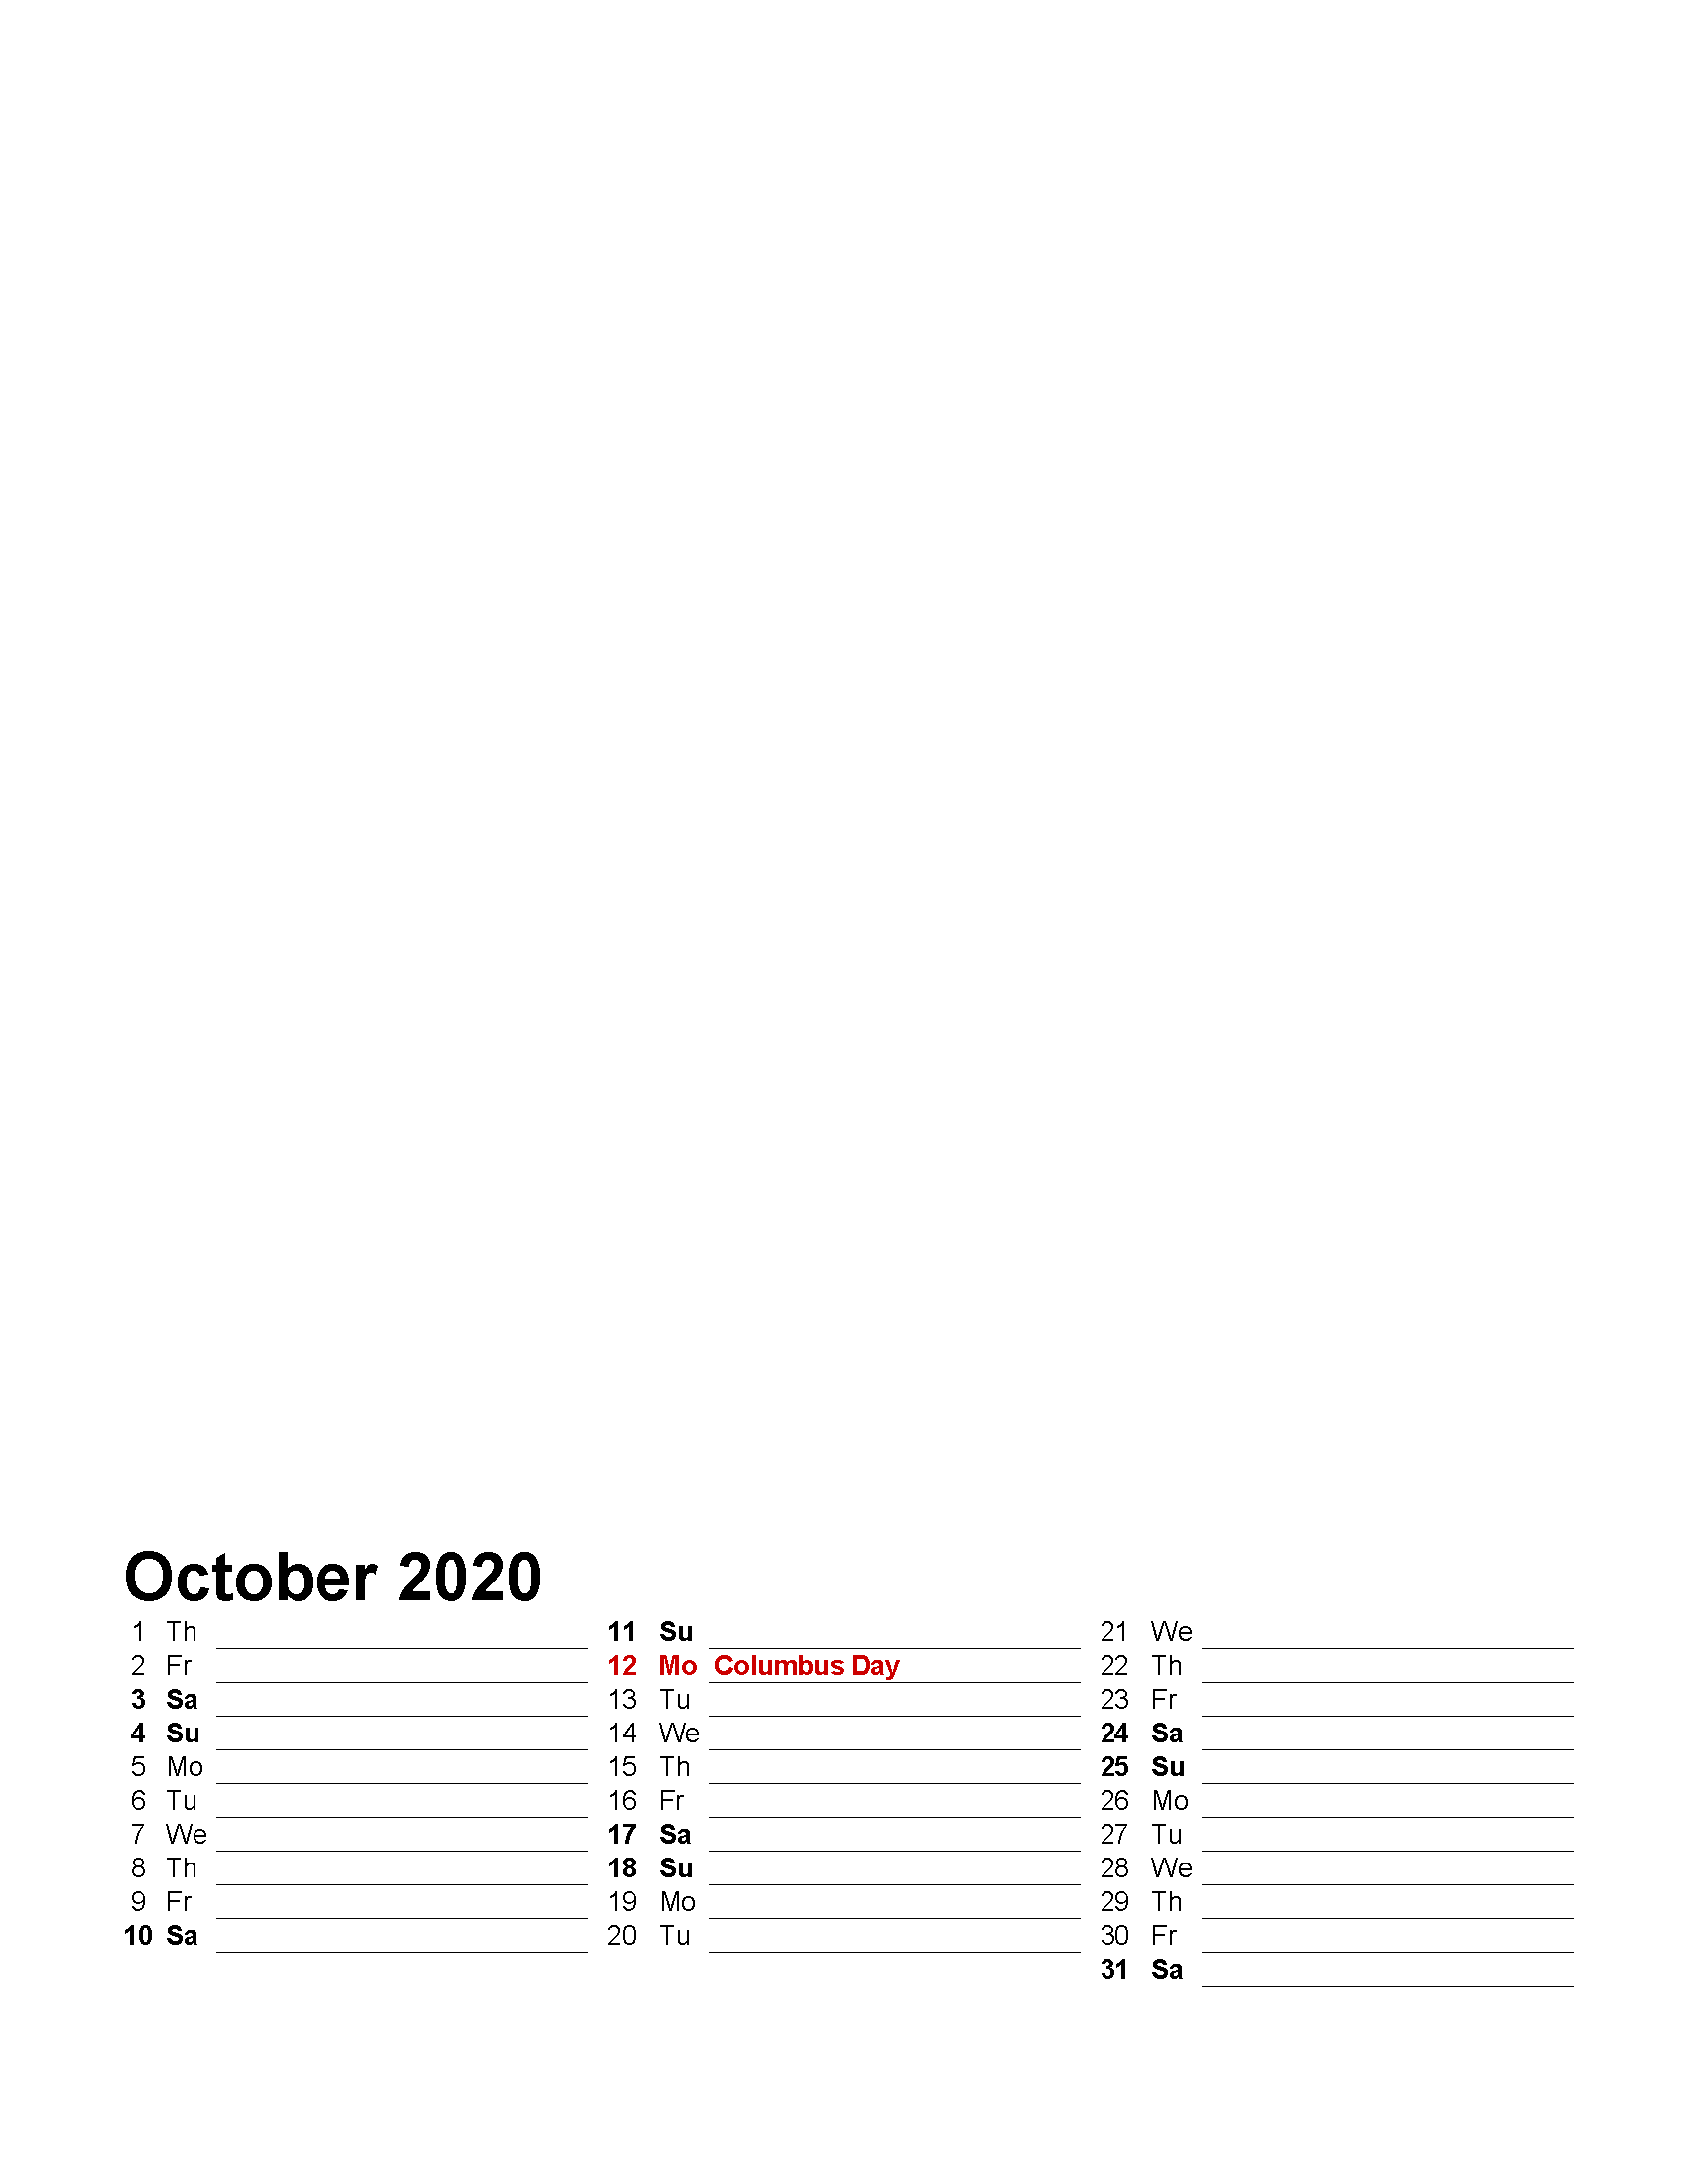 Printable Photo Calendar October 2020 with Holidays Template